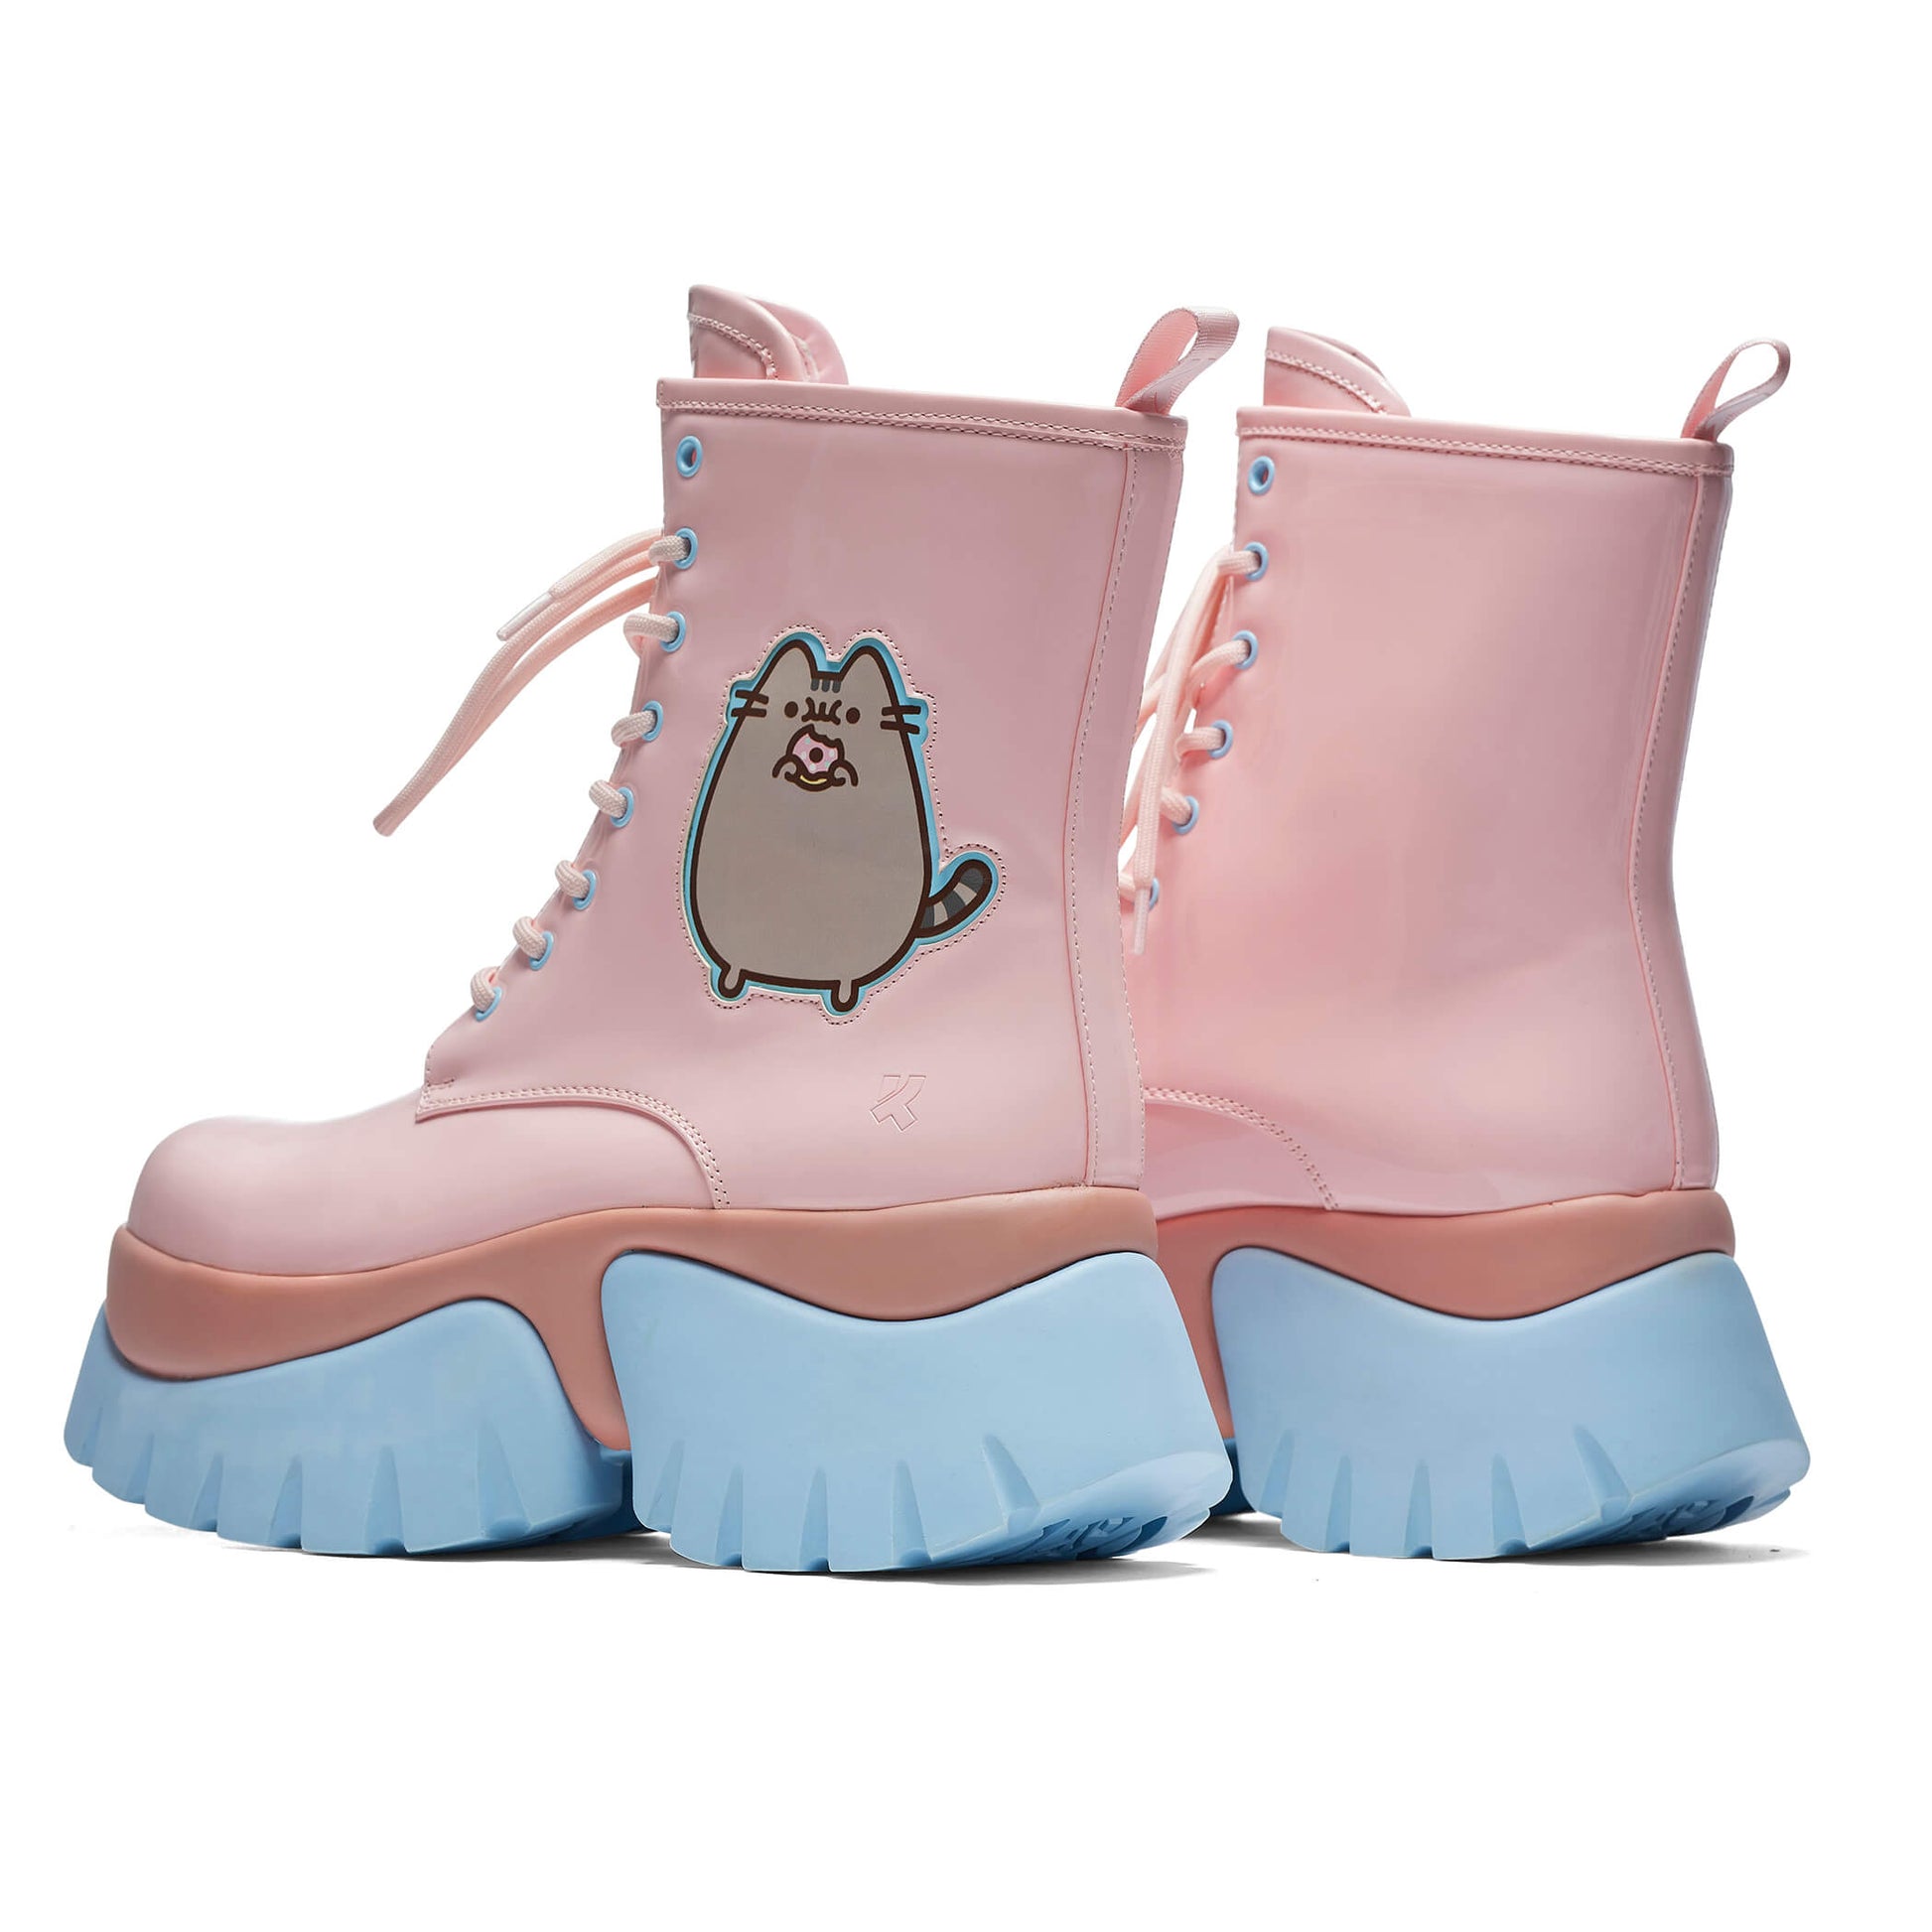 Pusheen Doughnuts Pastel Patent Boots - Ankle Boots - KOI Footwear - Pink - Back Side View